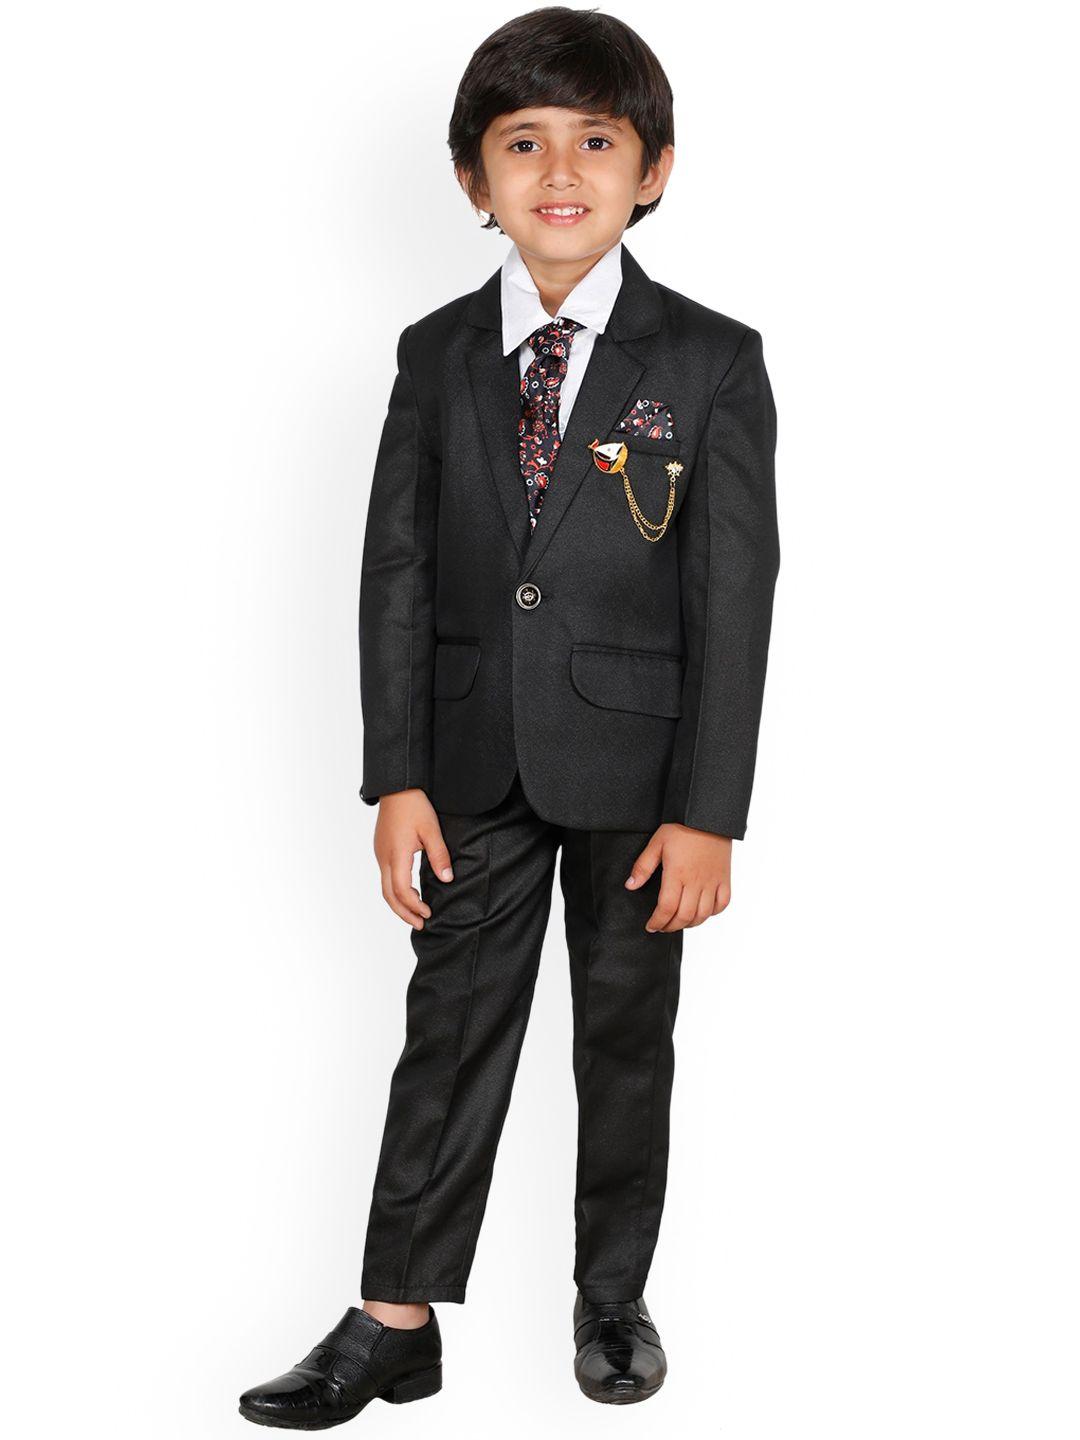 dkgf fashion boys black single-breasted suit